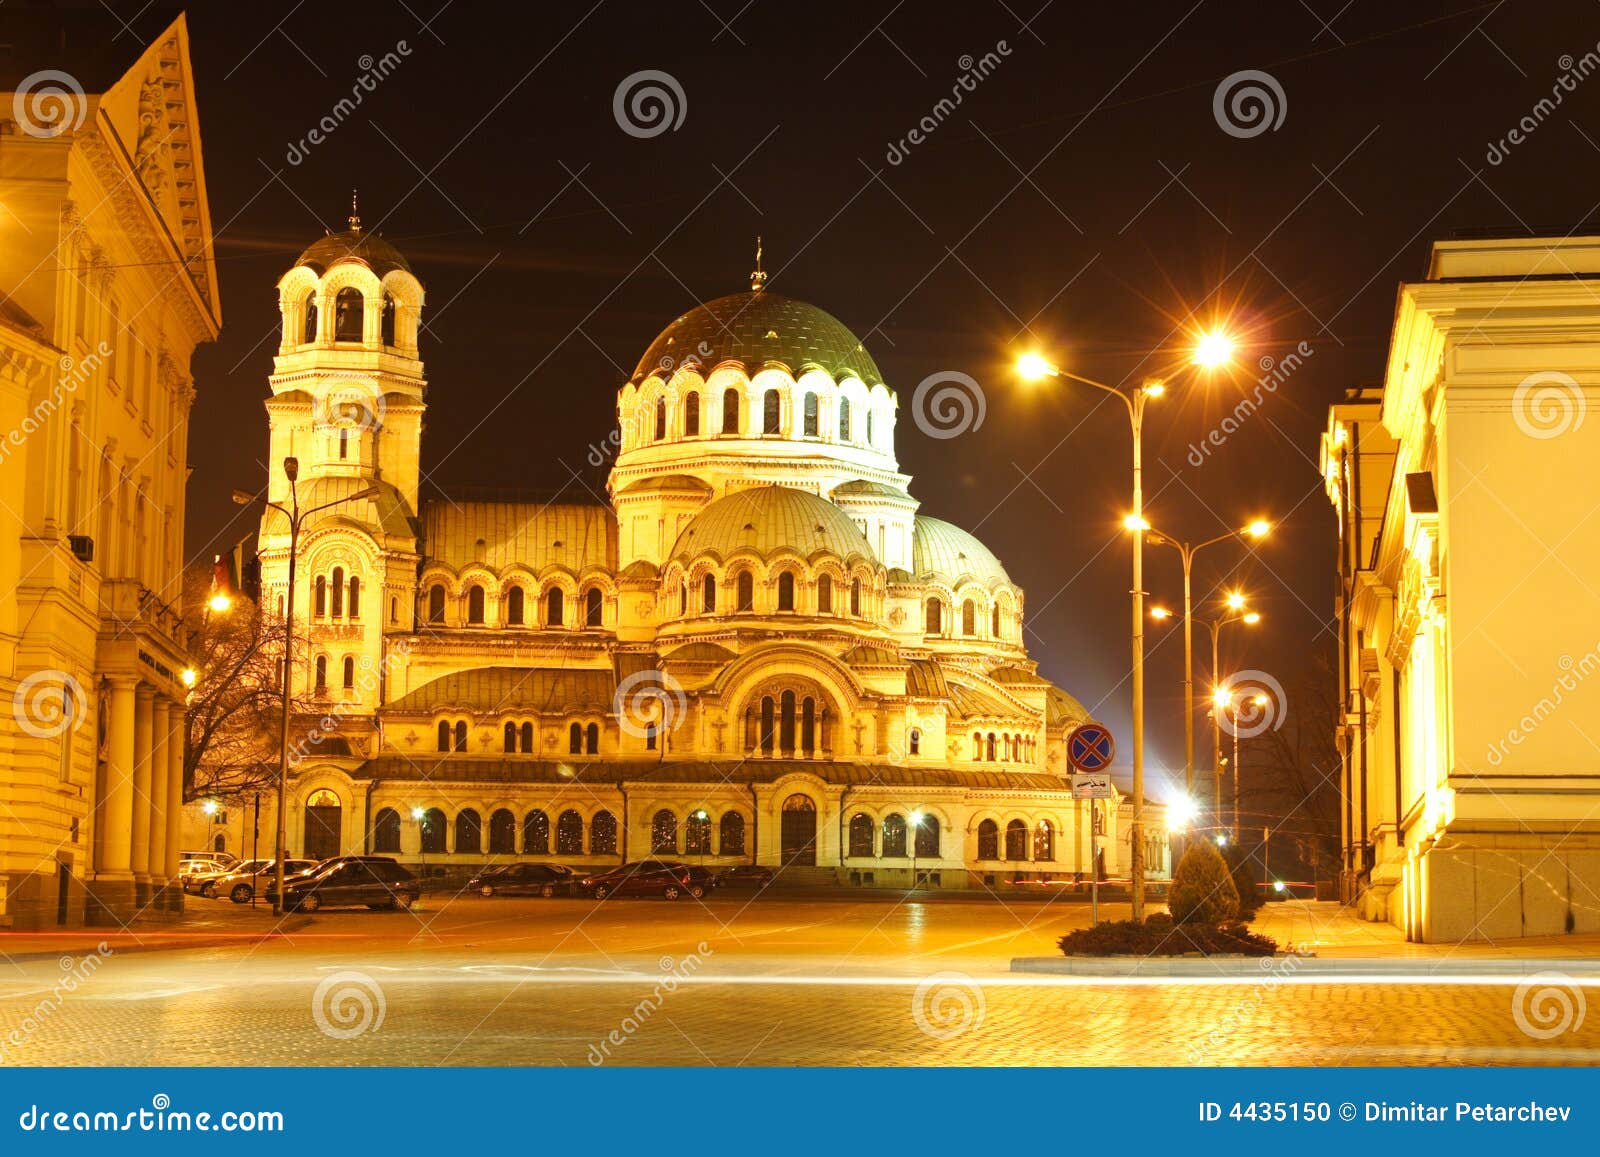 the center of sofia, bulgaria by night